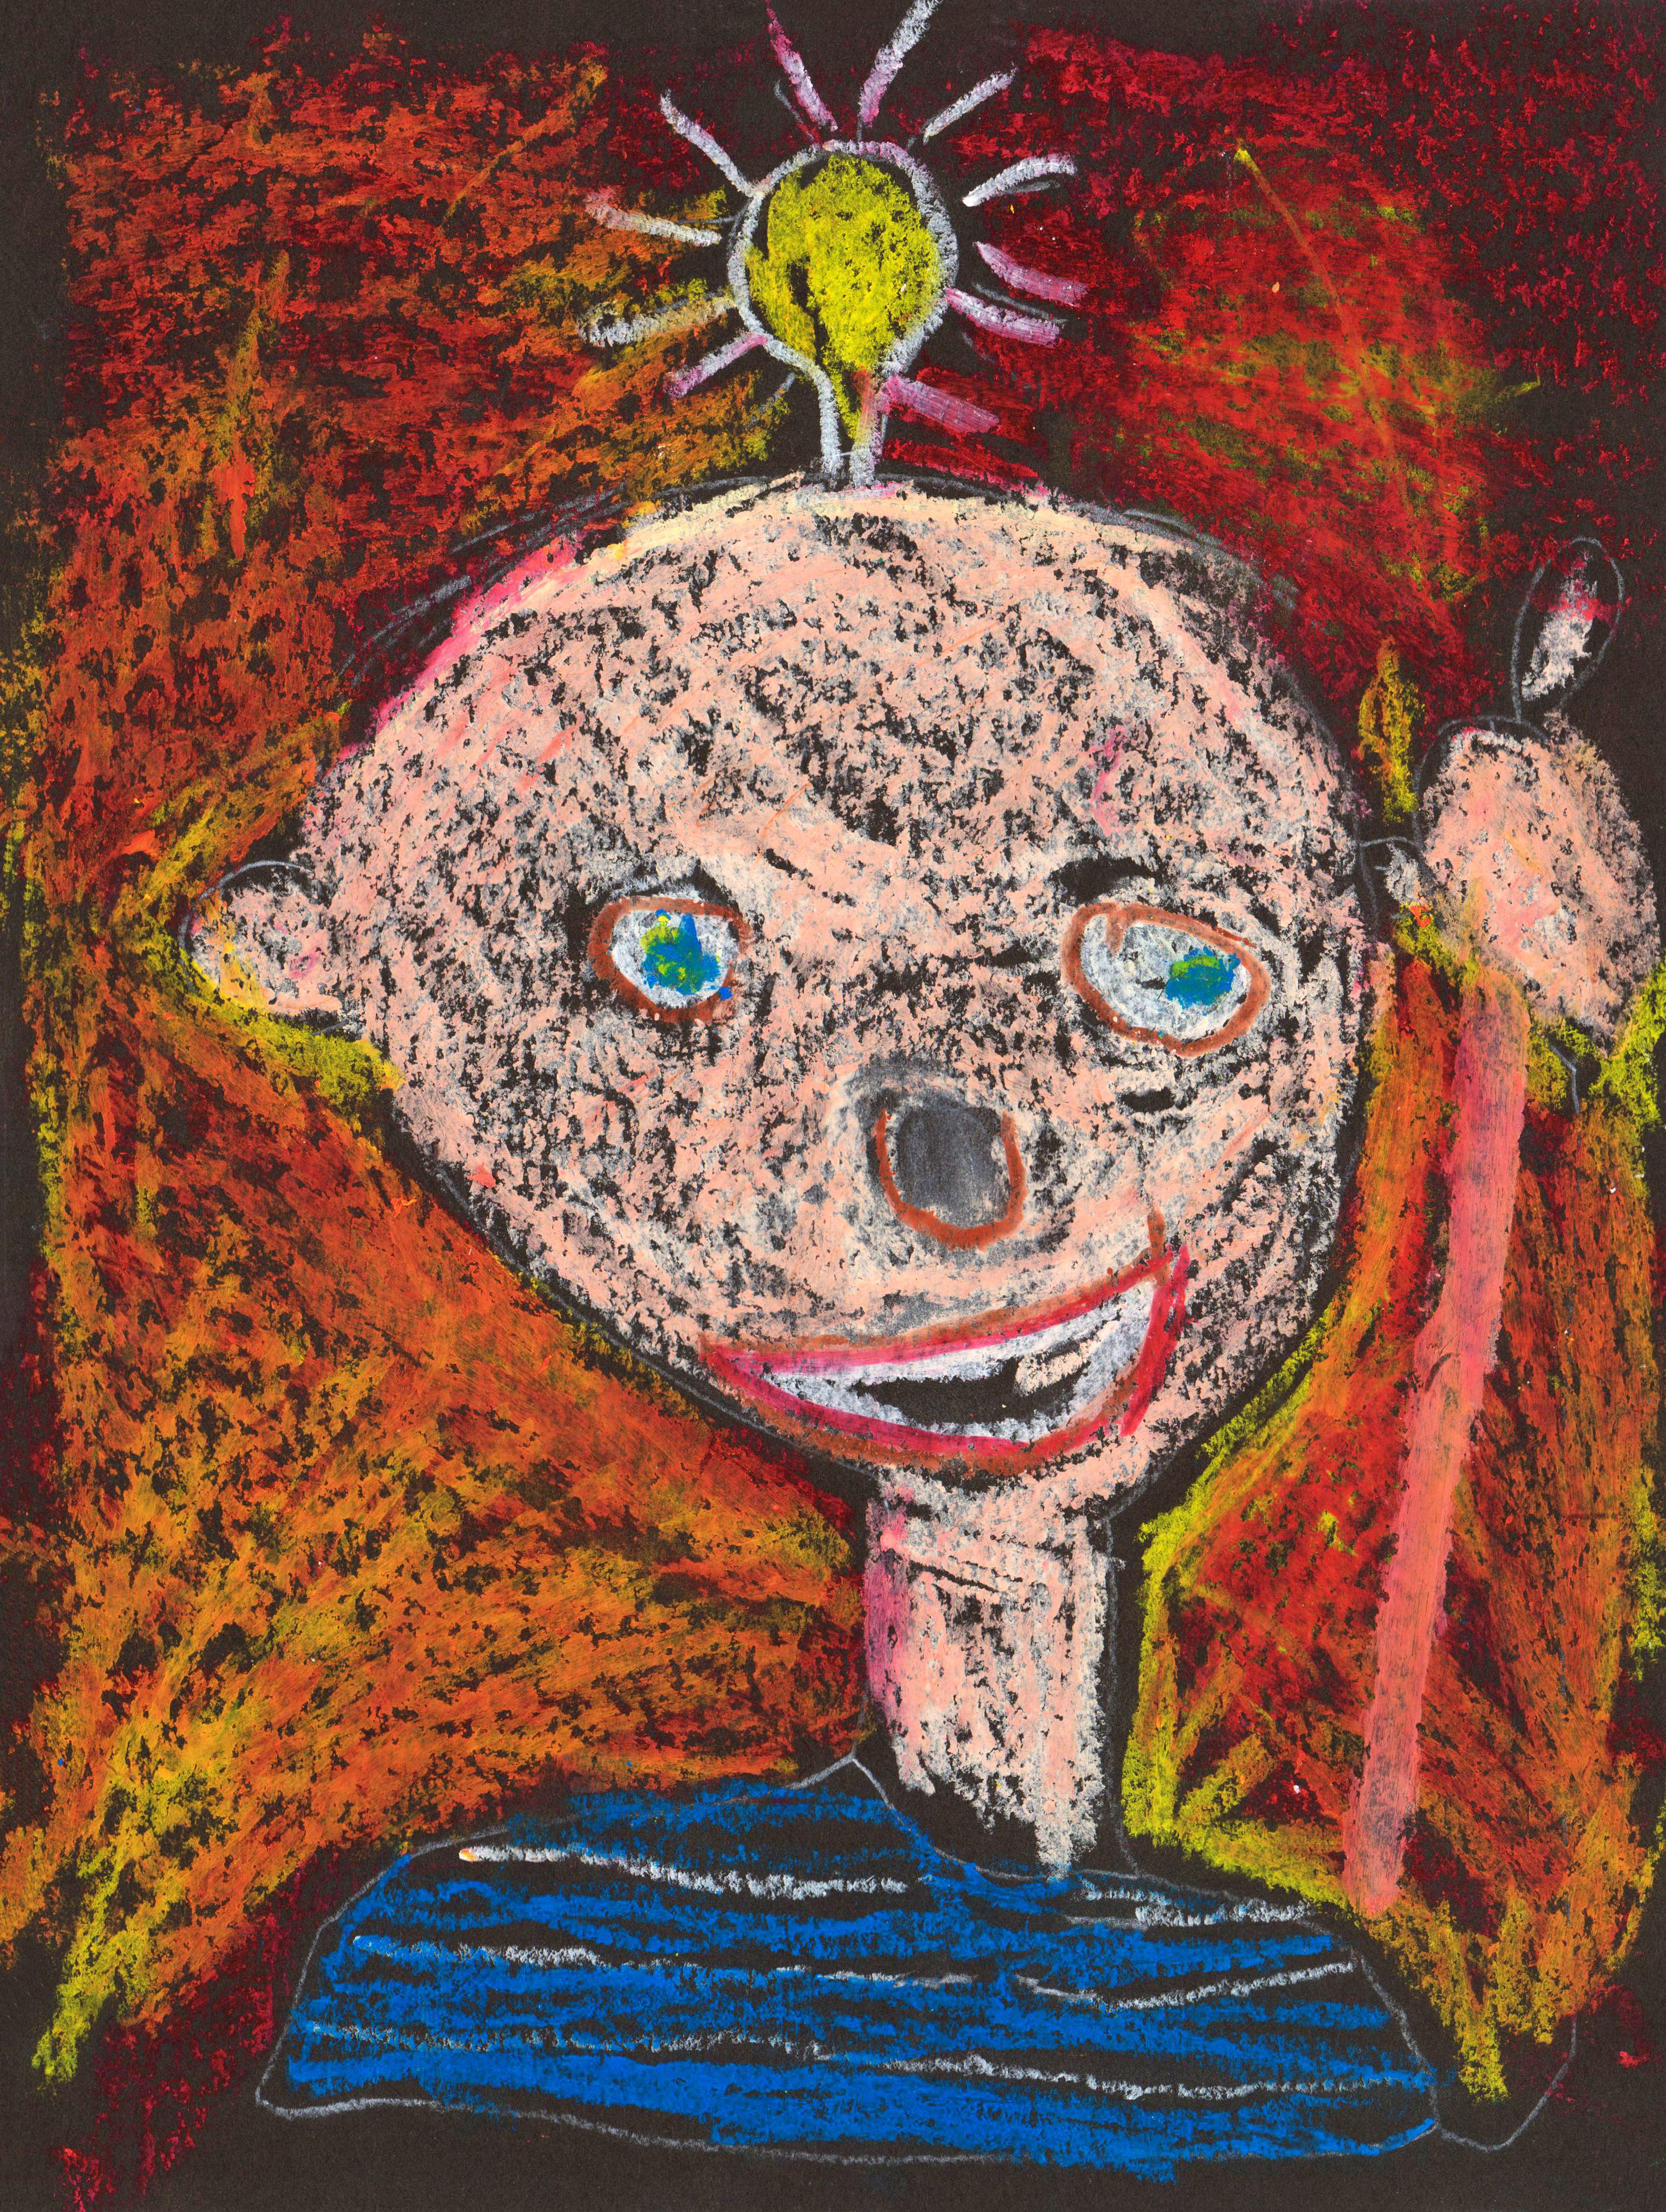 Oil pastel self-portrait of a young, light-skinned boy smiling wide and facing the viewer. He wears a shirt with black and blue horizontal stripes. His bold blue-green eyes and dark nose are drawn as circles outlined in light brown strokes. A yellow light bulb with extending white light beams is drawn directly atop his head, which appears hairless. The boy's ears are drawn as circles on either side, and the background behind him changes color from red near the top to orange near the bottom.